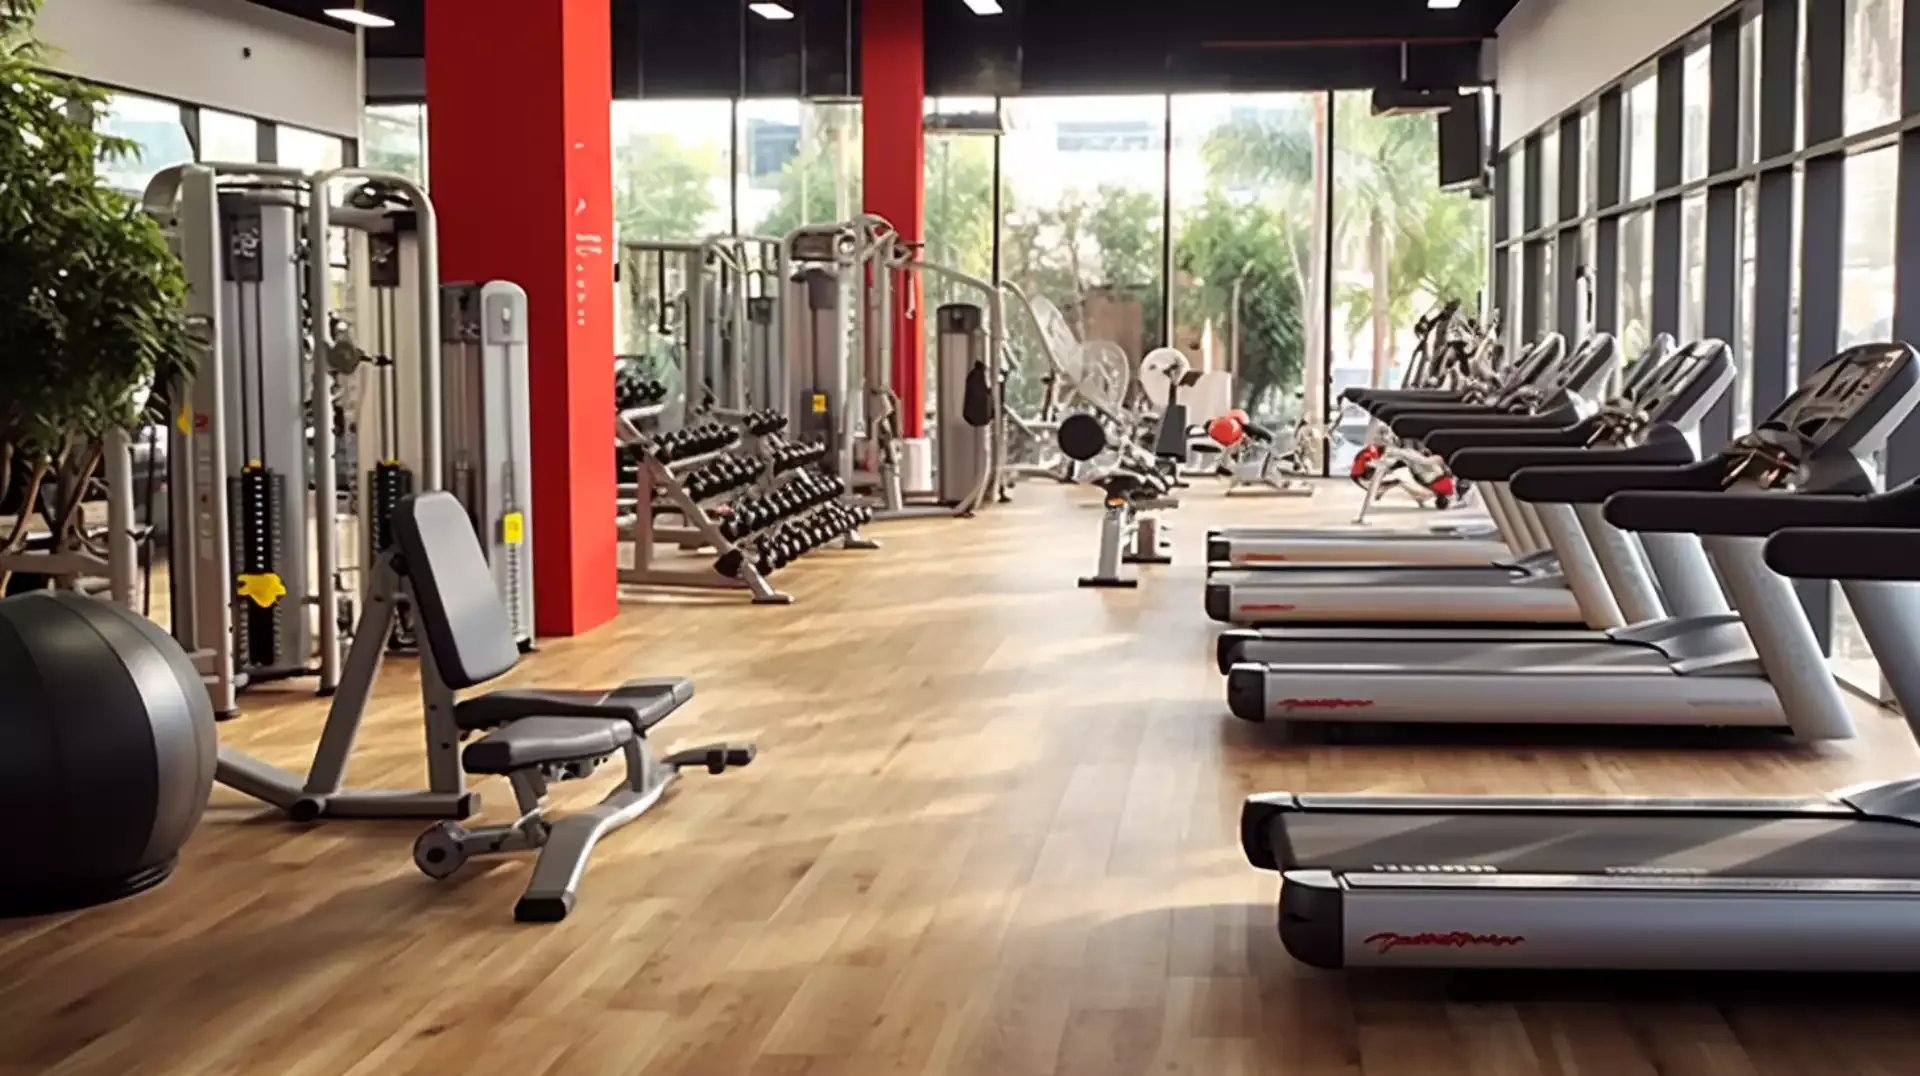 Fitness Options in Arabian Ranches - The energetic atmosphere of the fitness centers in Dubai